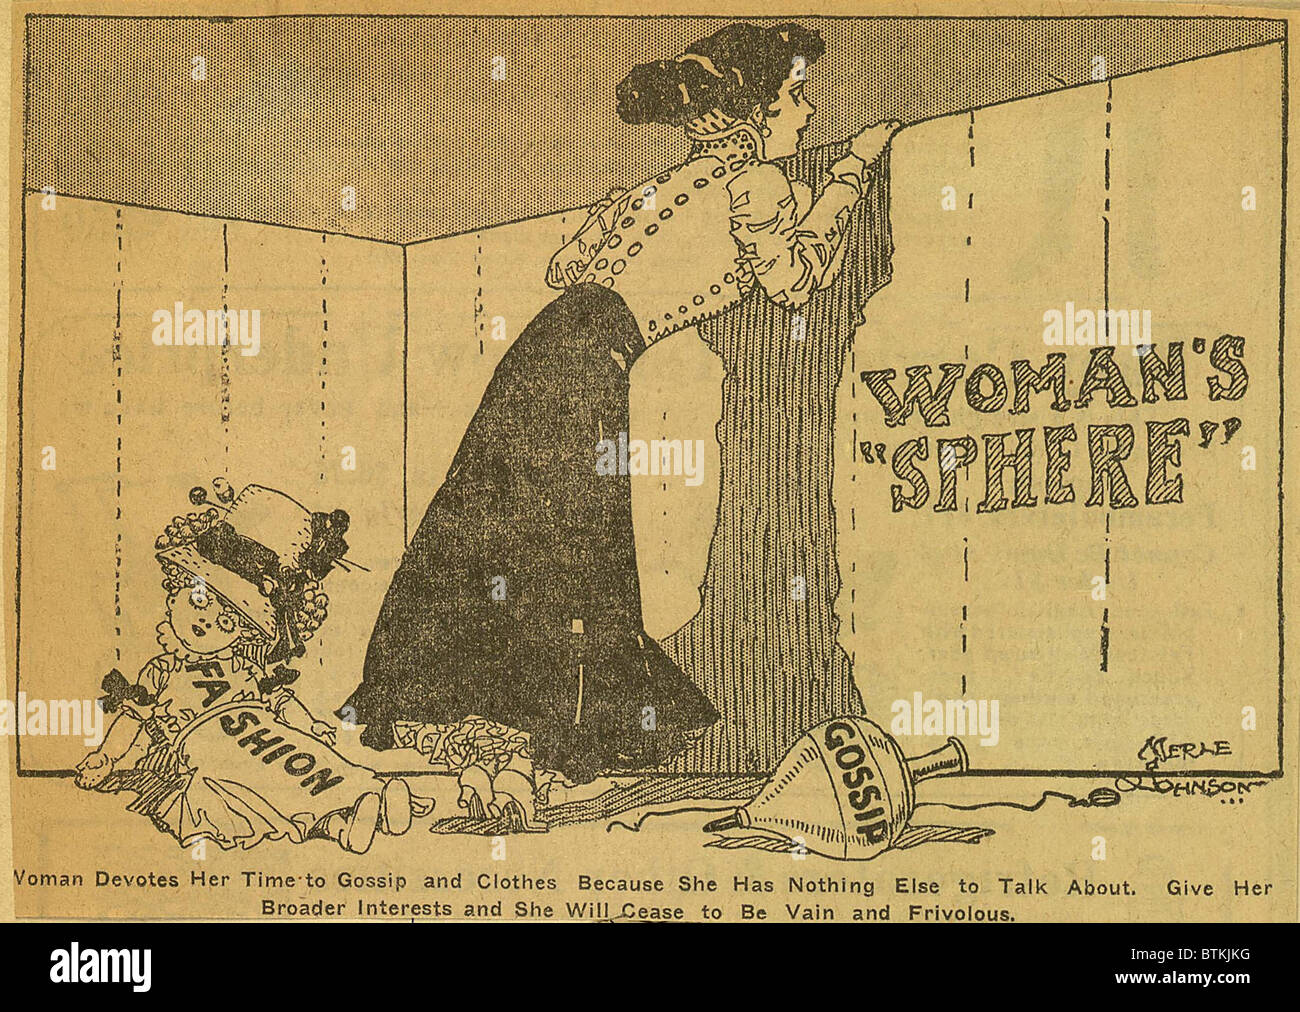 Political cartoon shows woman peering over a fence labeled 'Woman's Sphere' while her toys 'Fashion' and 'gossip' lay abandoned. By Merle De Vore Johnson, 1909. Stock Photo